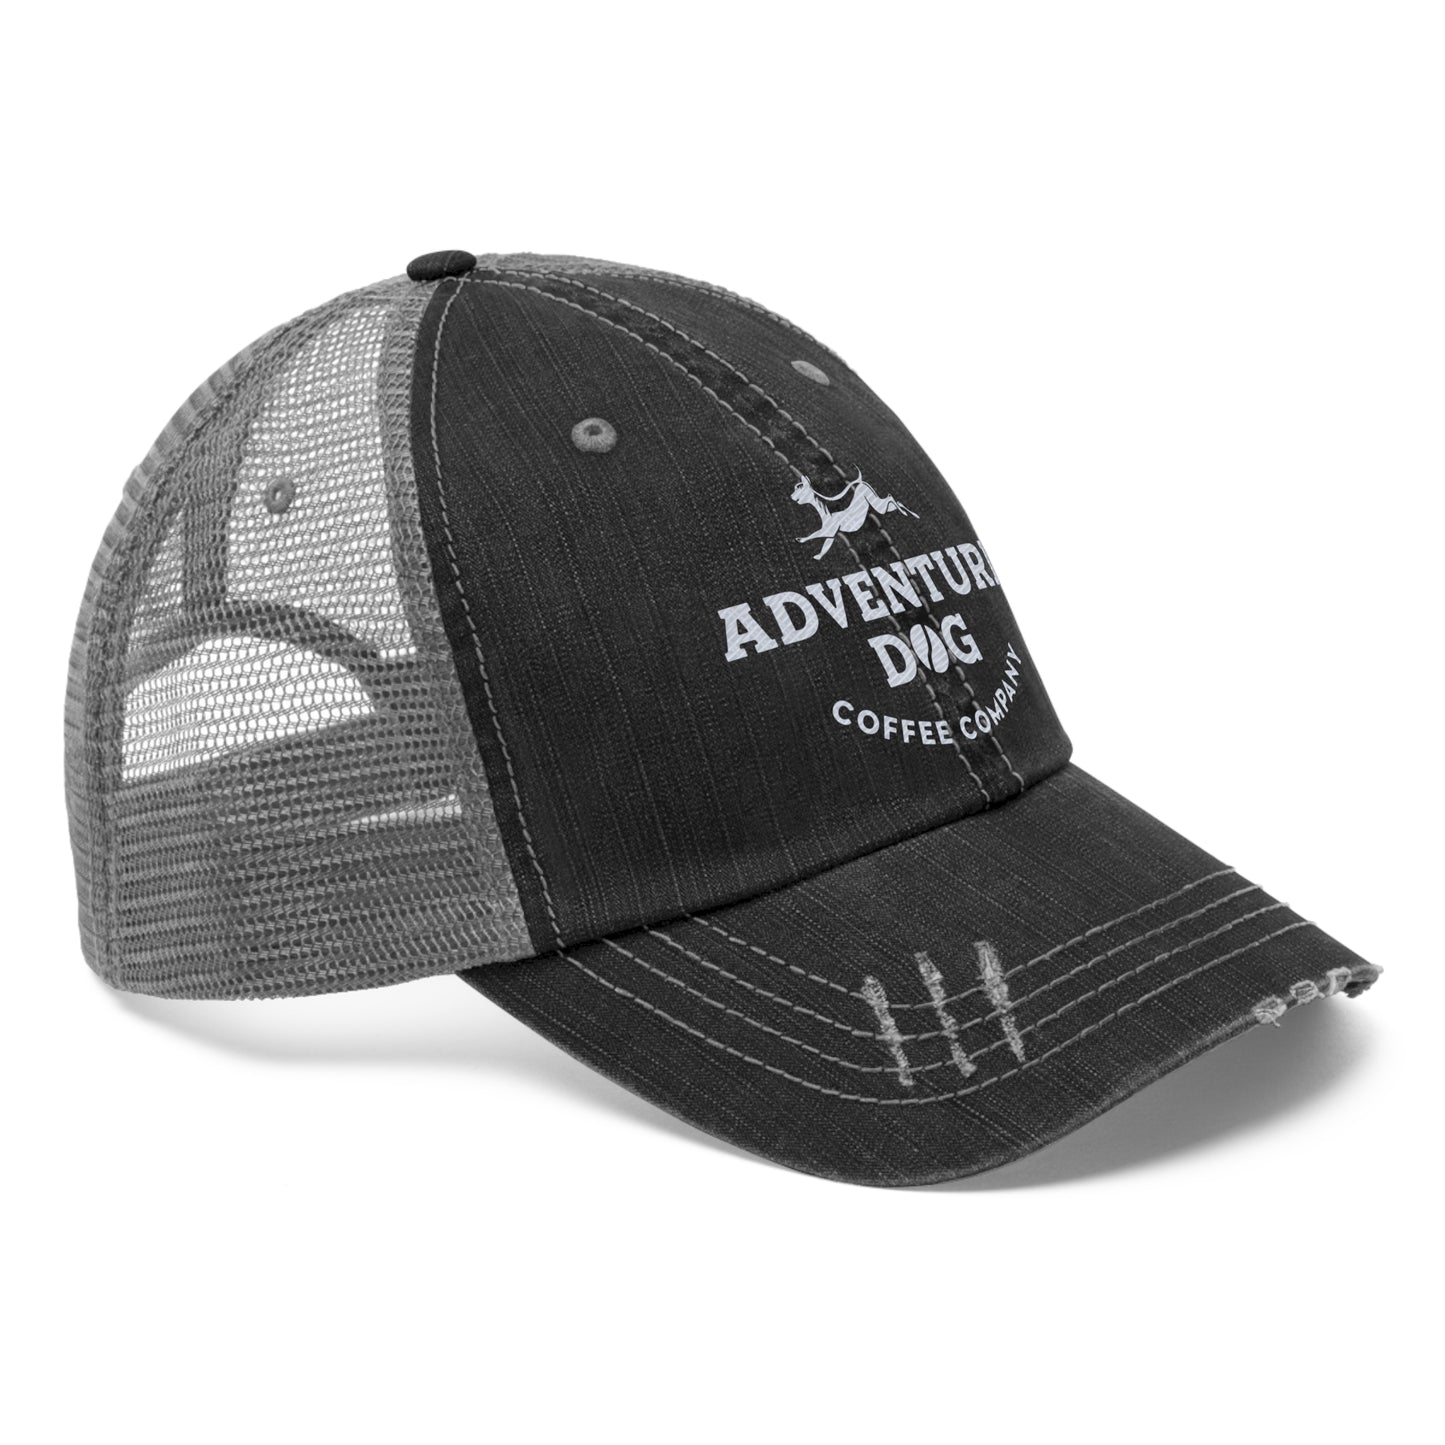 ADCC Vintage Style Trucker Hat